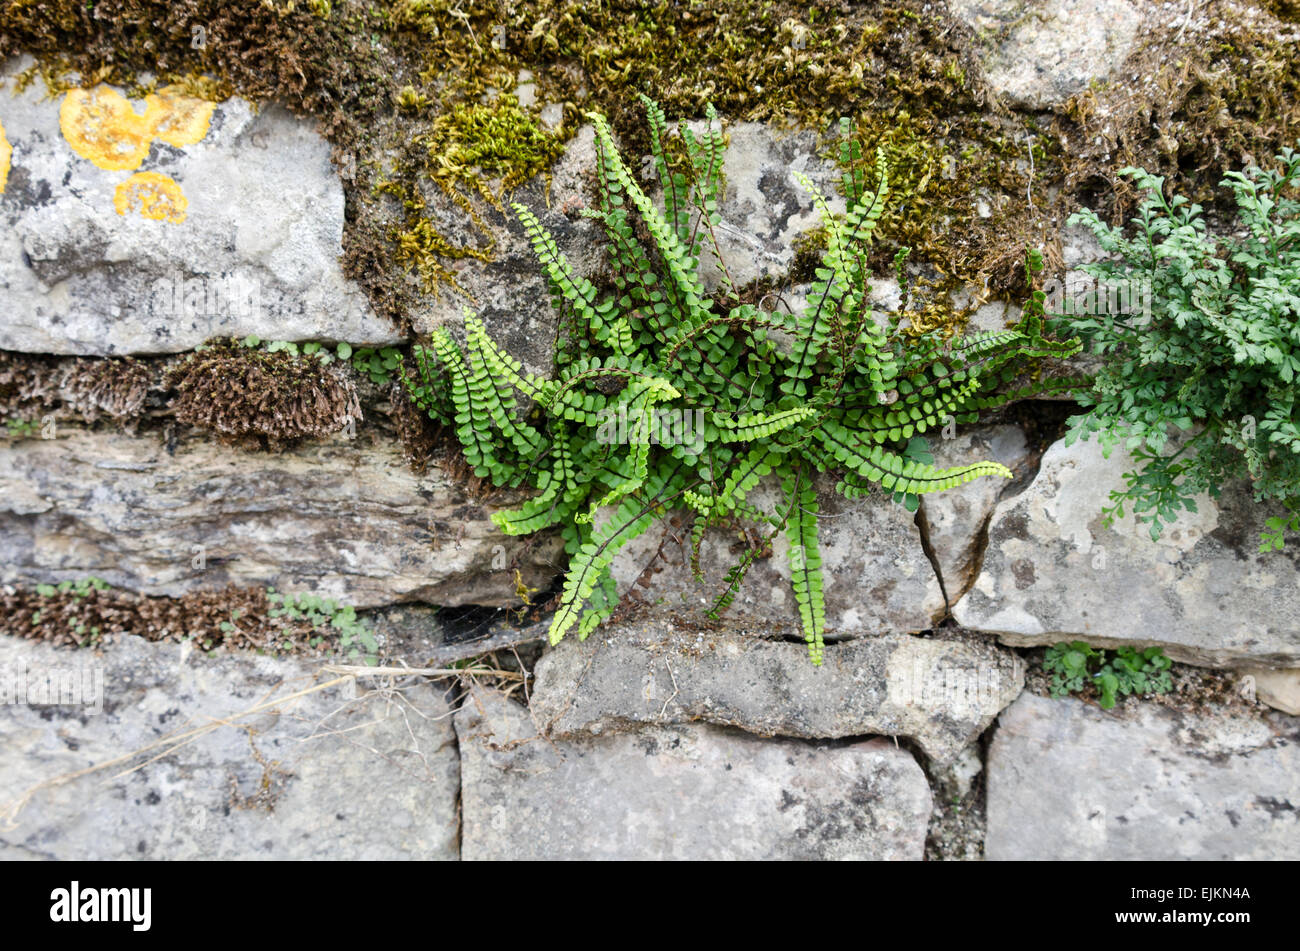 Maidenhair fern (Asplenium trichomanes) growing in the joints of an old stone wall in Chagny, Saône-et-Loire, Burgundy, France. Stock Photo